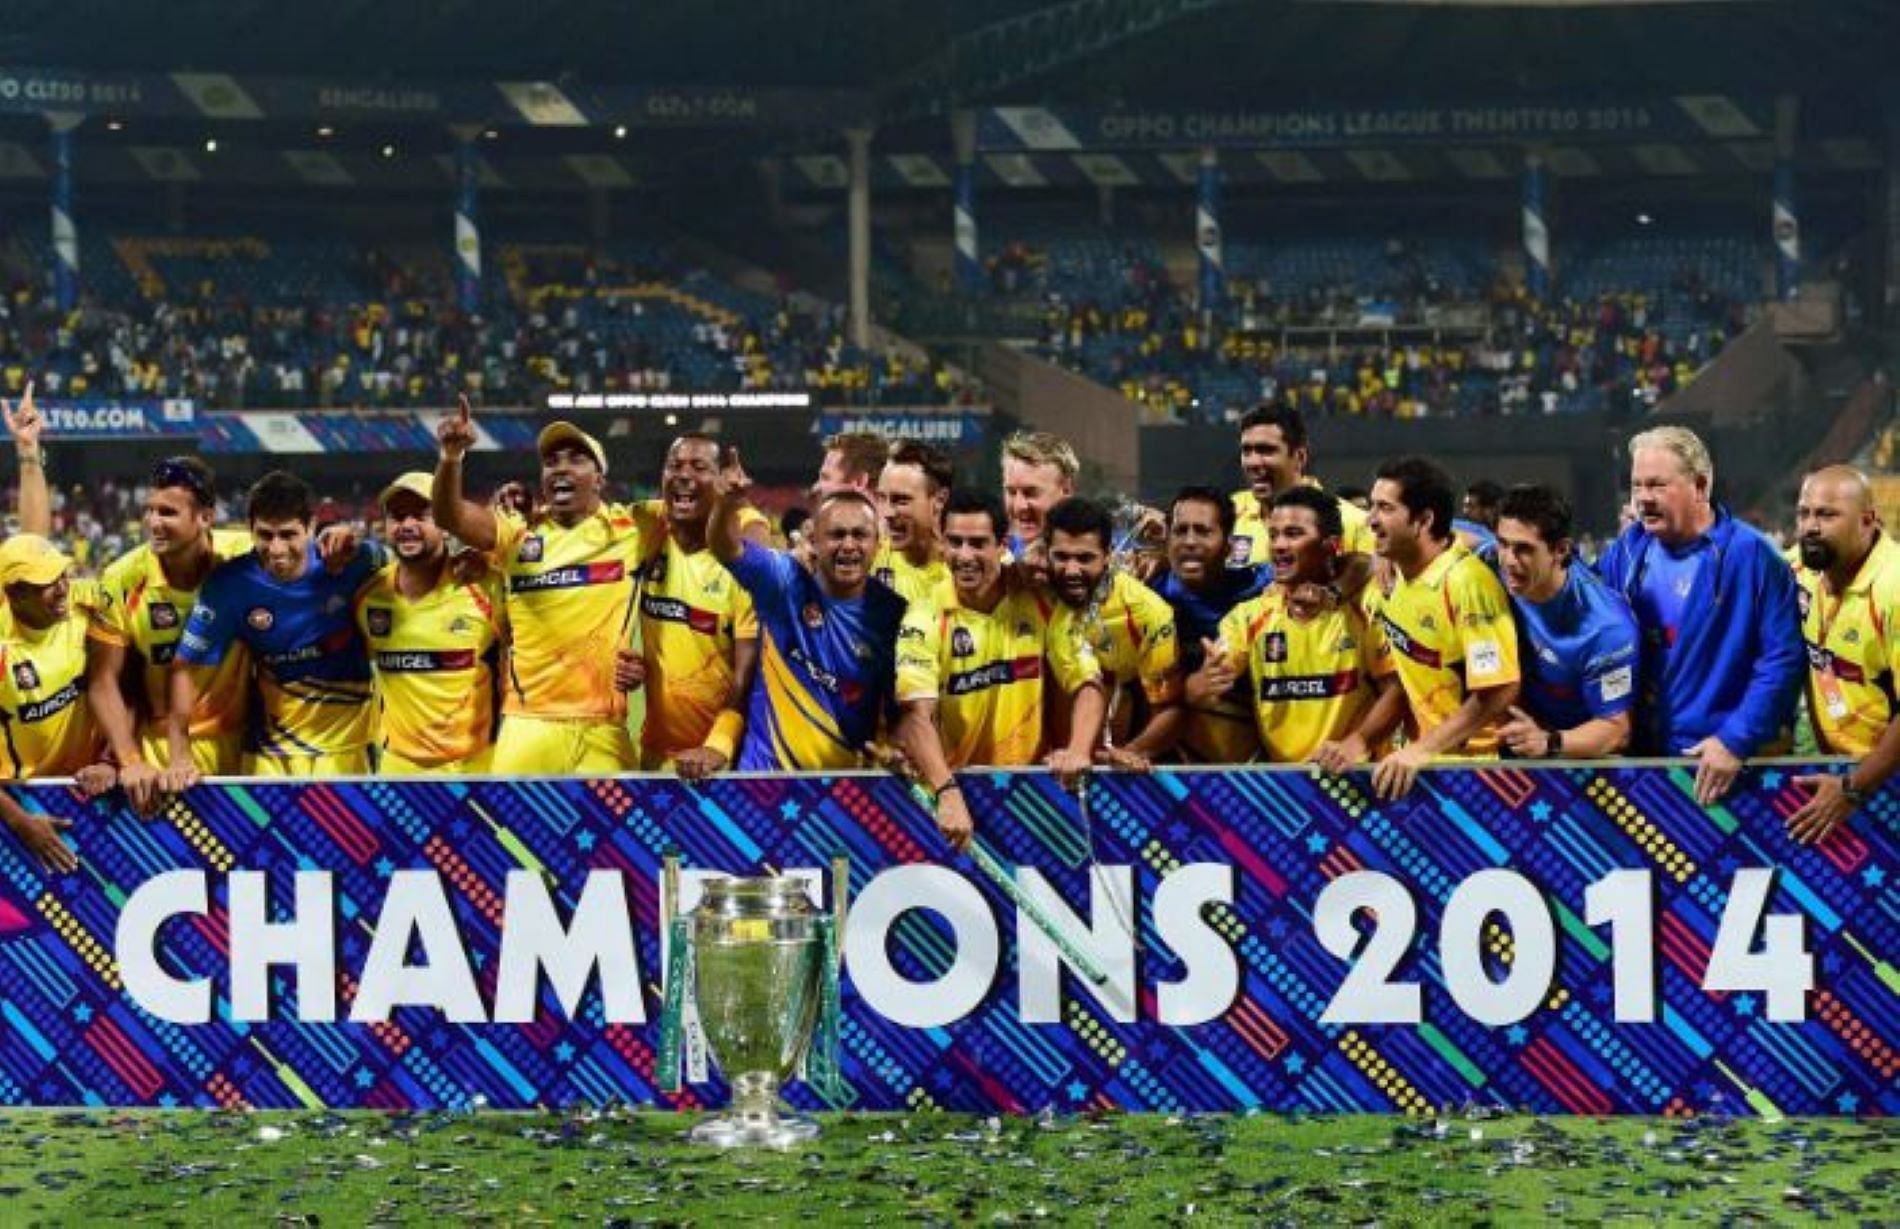 CSK are one of only two teams, along with MI, to win the CL T20 twice.